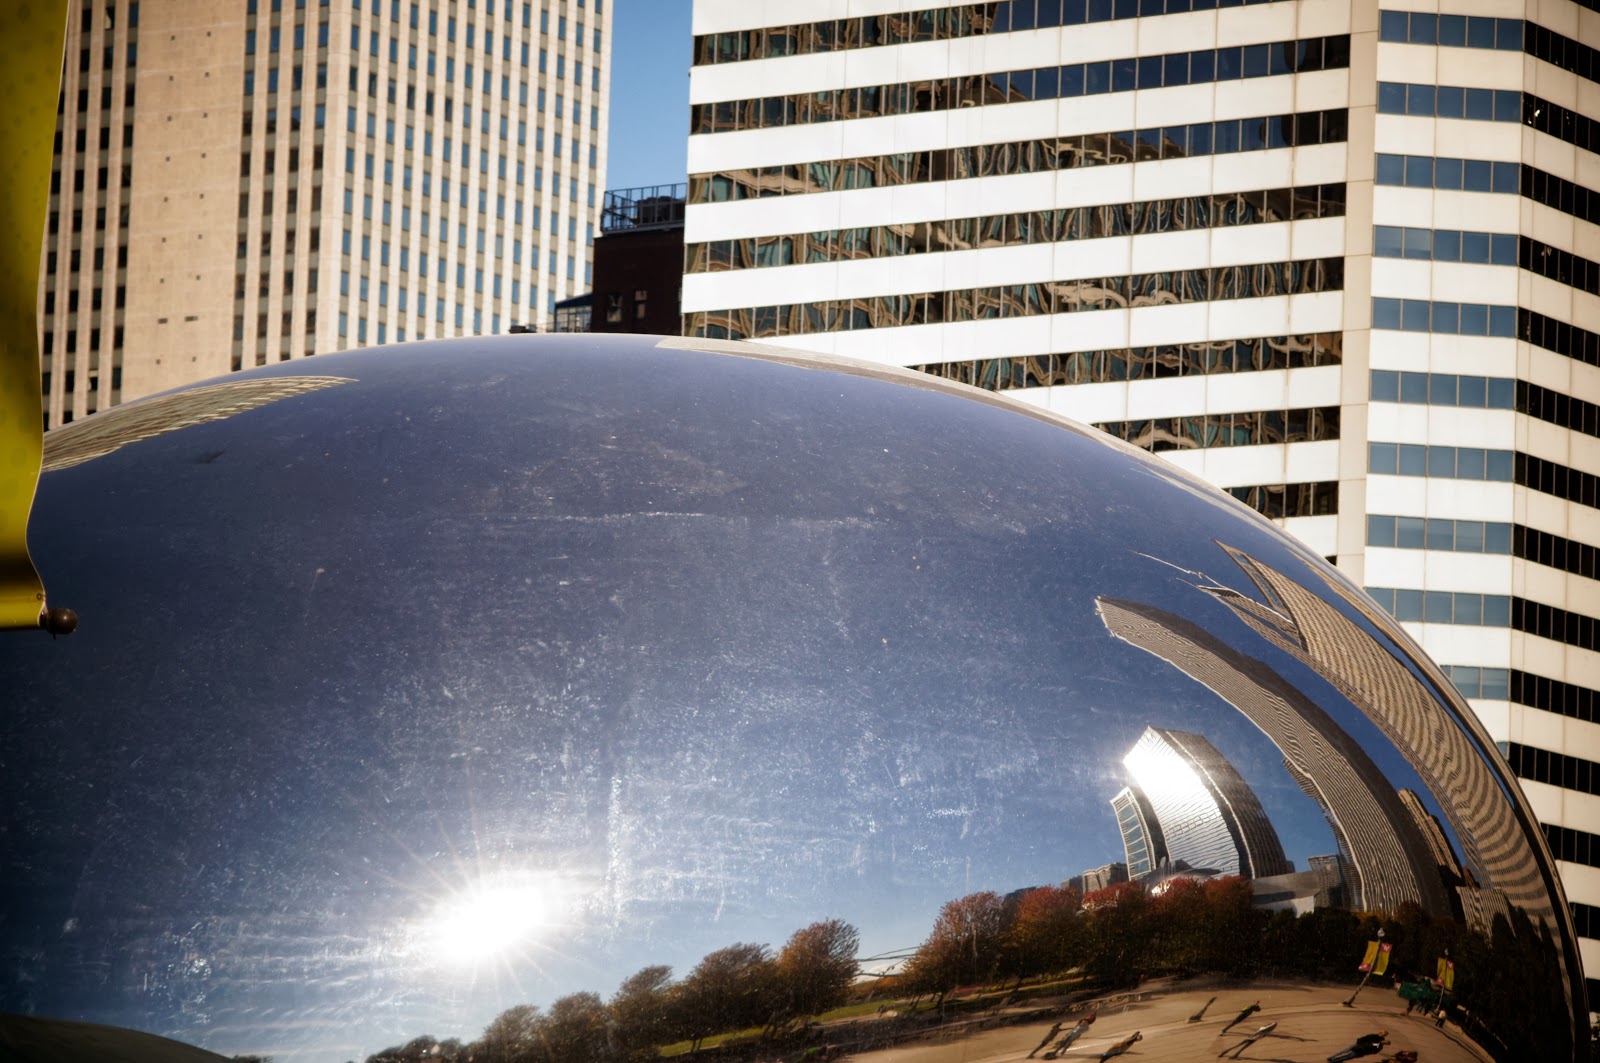 [Cloud-gate-anish-kapoor-free-pictures-1%2520%25281%2529%255B3%255D.jpg]